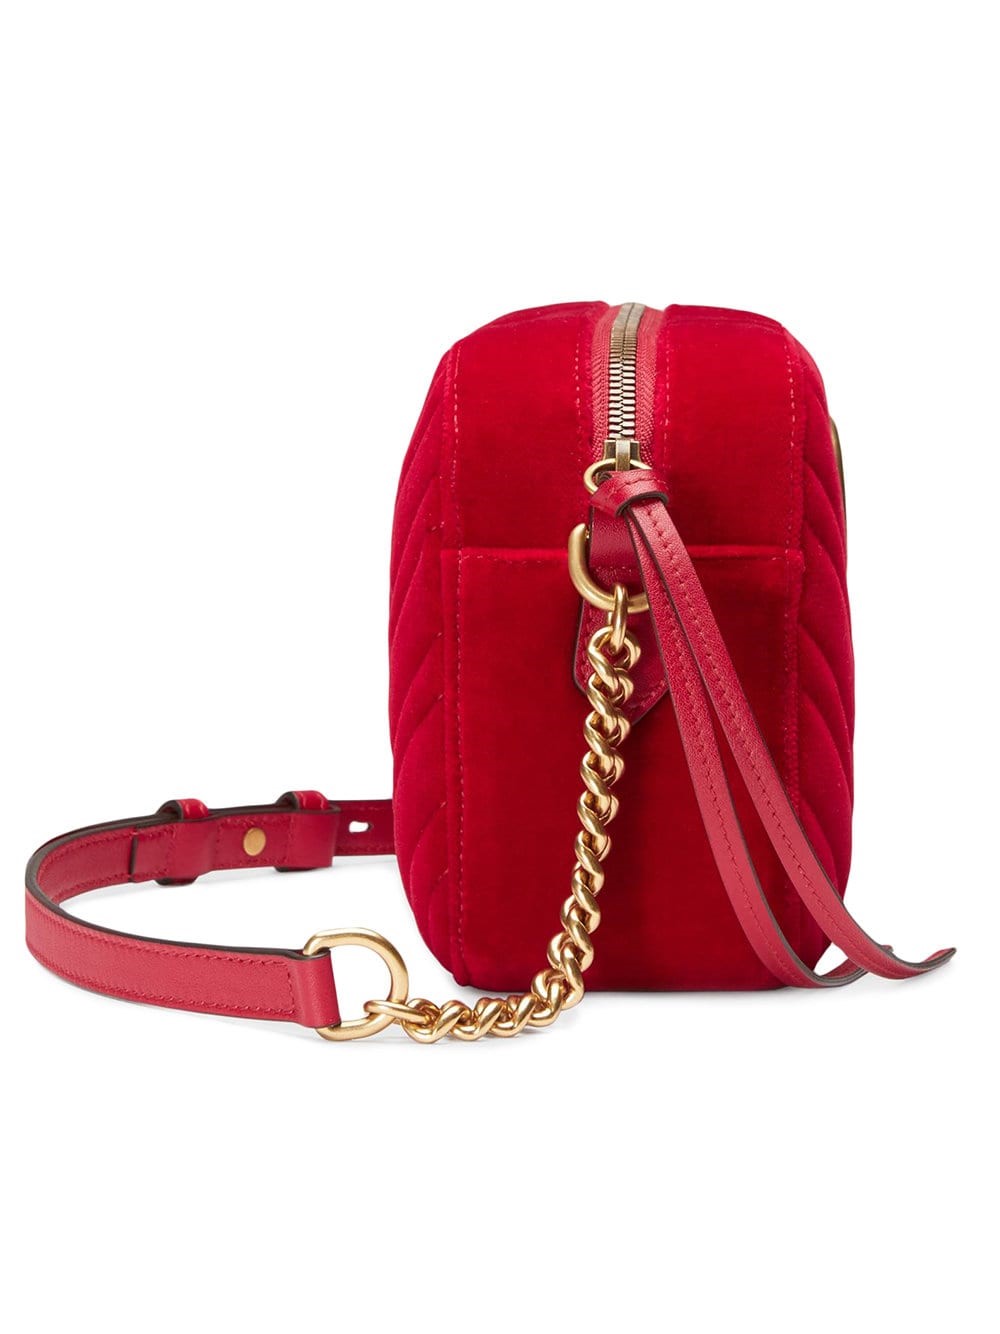 gucci GG MARMONT SHOULDER BAG available on mediakits.theygsgroup.com - 25085